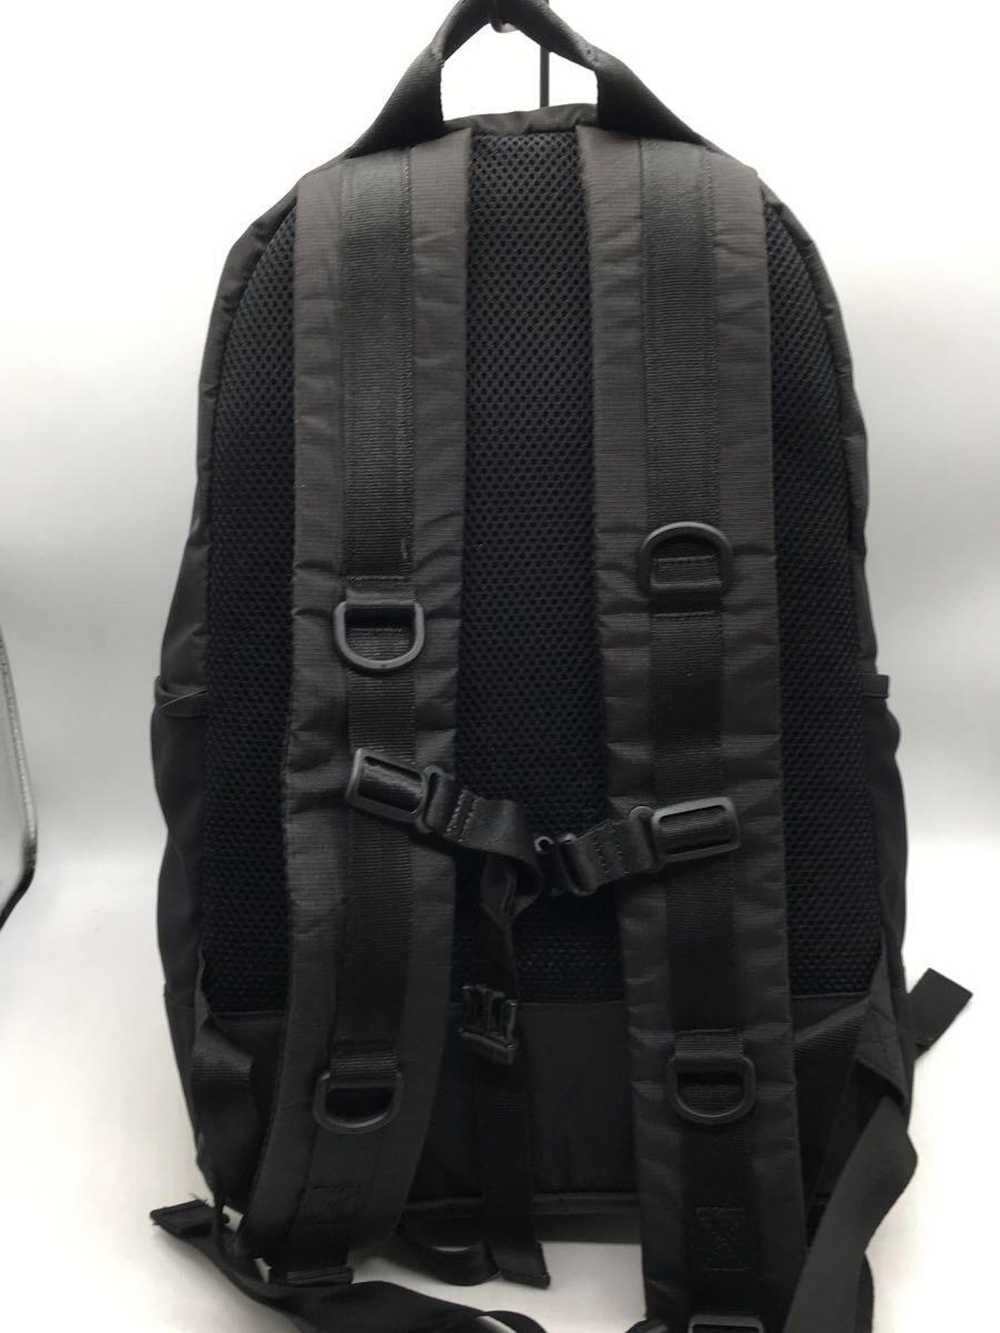 Undercover Undercover Maniac Nylon Backpack - image 3